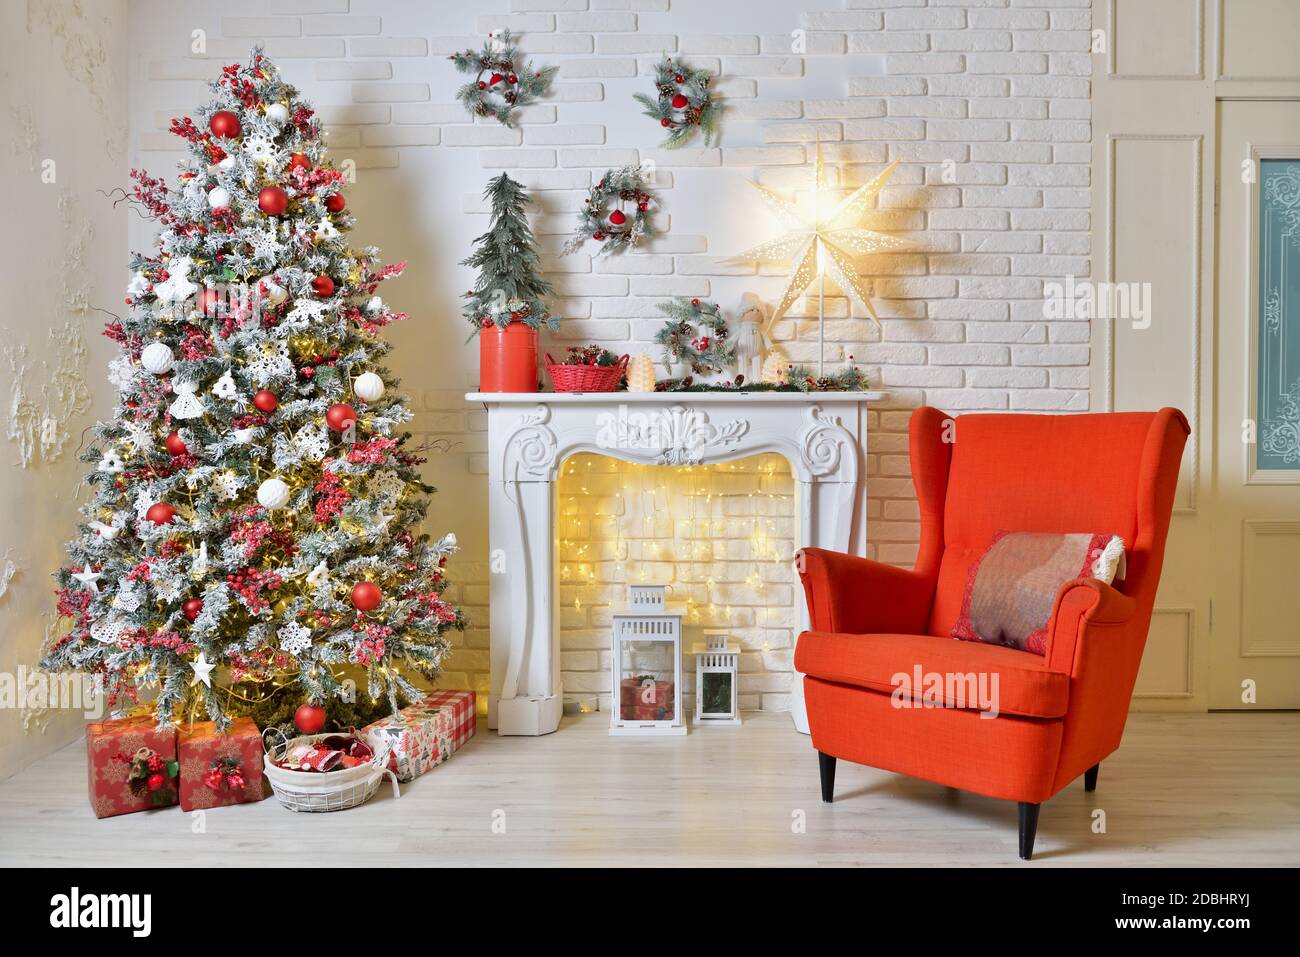 Cozy Christmas decorations in living room with red armchair, Christmas tree and garlands Stock Photo